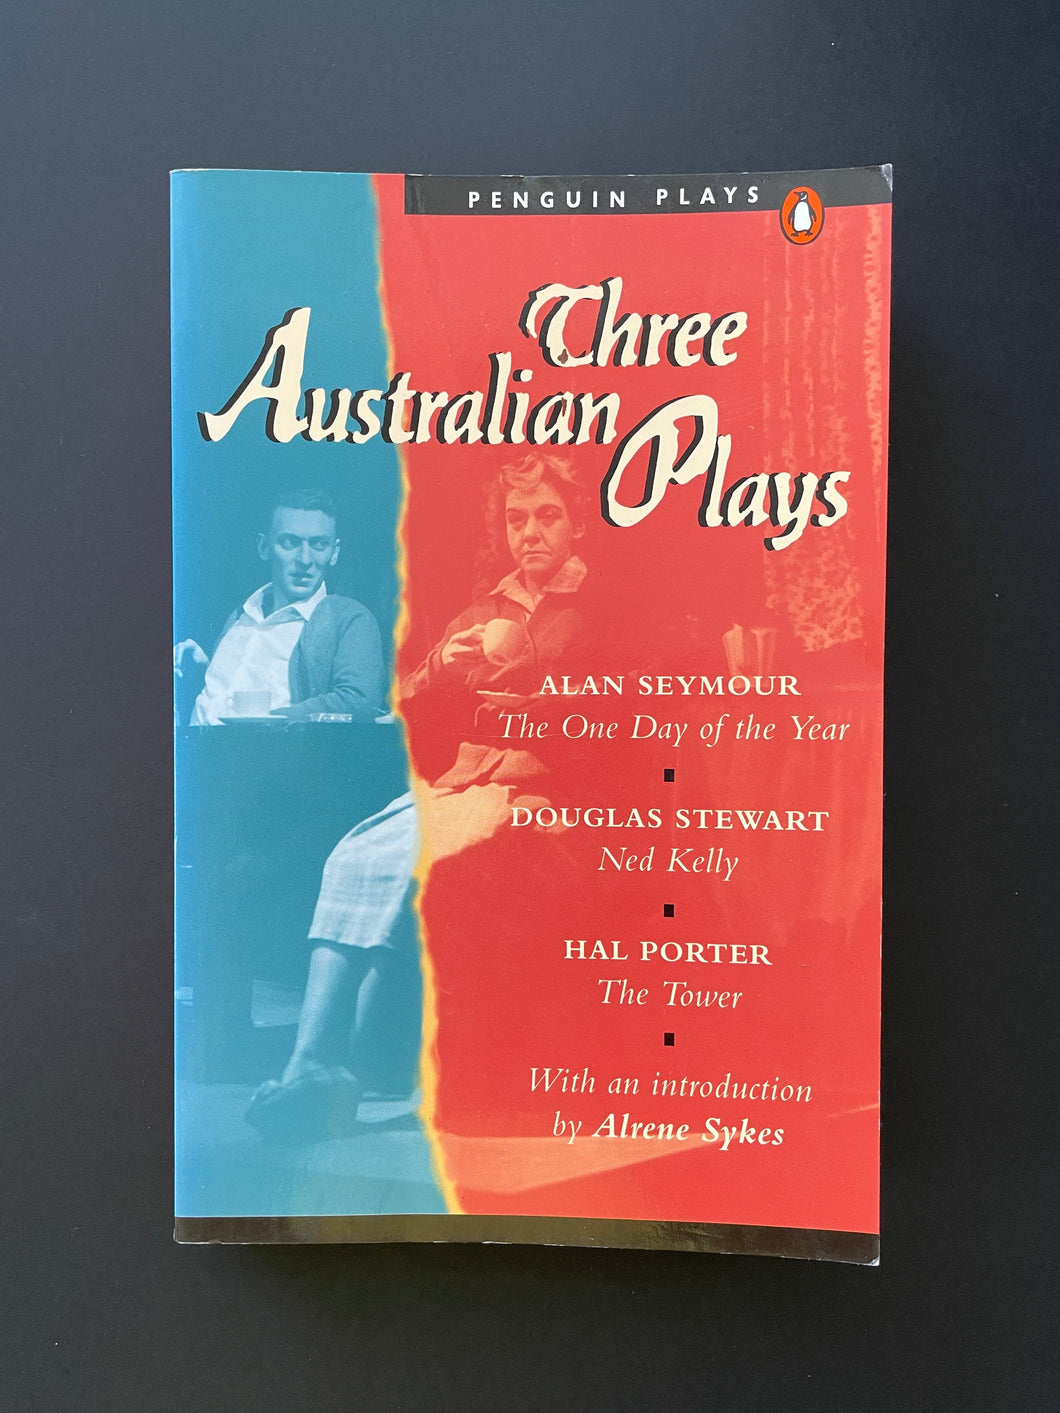 Three Australian Plays by Alan Seymour: photo of the front cover which shows minor creasing, scuff marks and scratches.